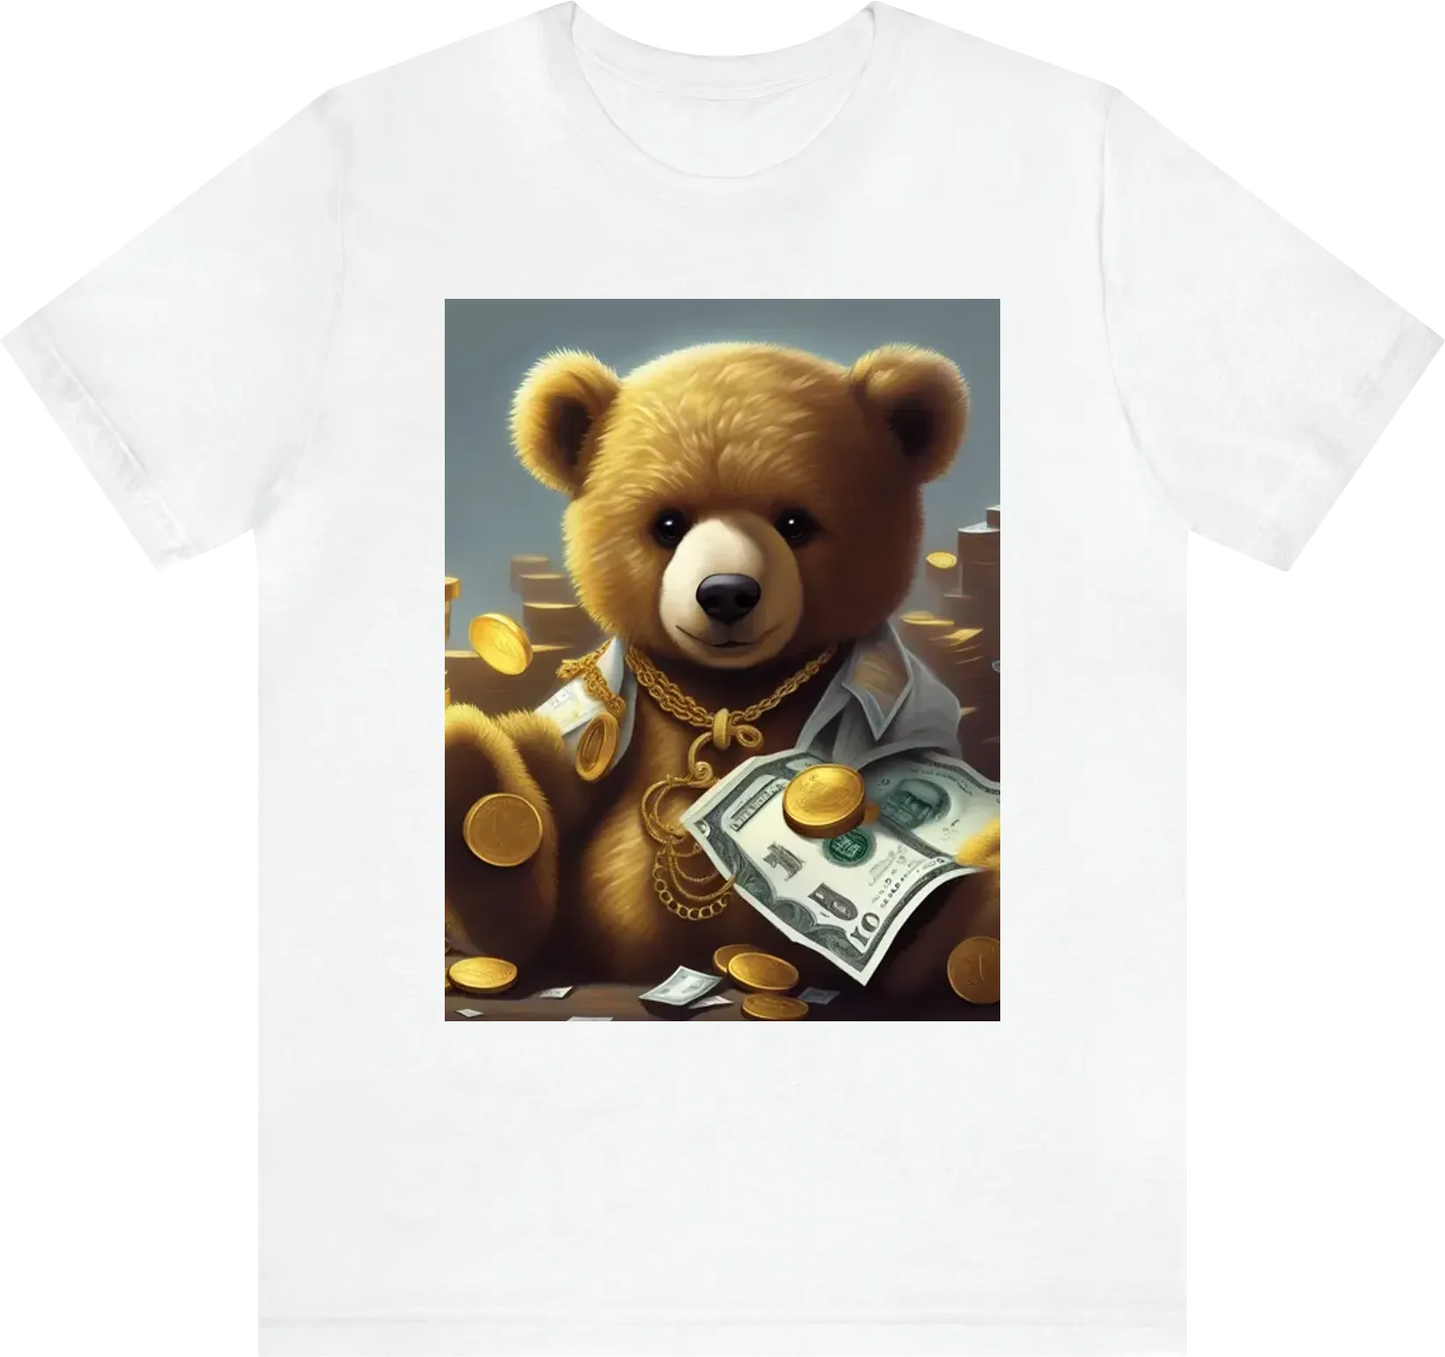 Teddy bear with money wearing some gold jwellery and looking cool